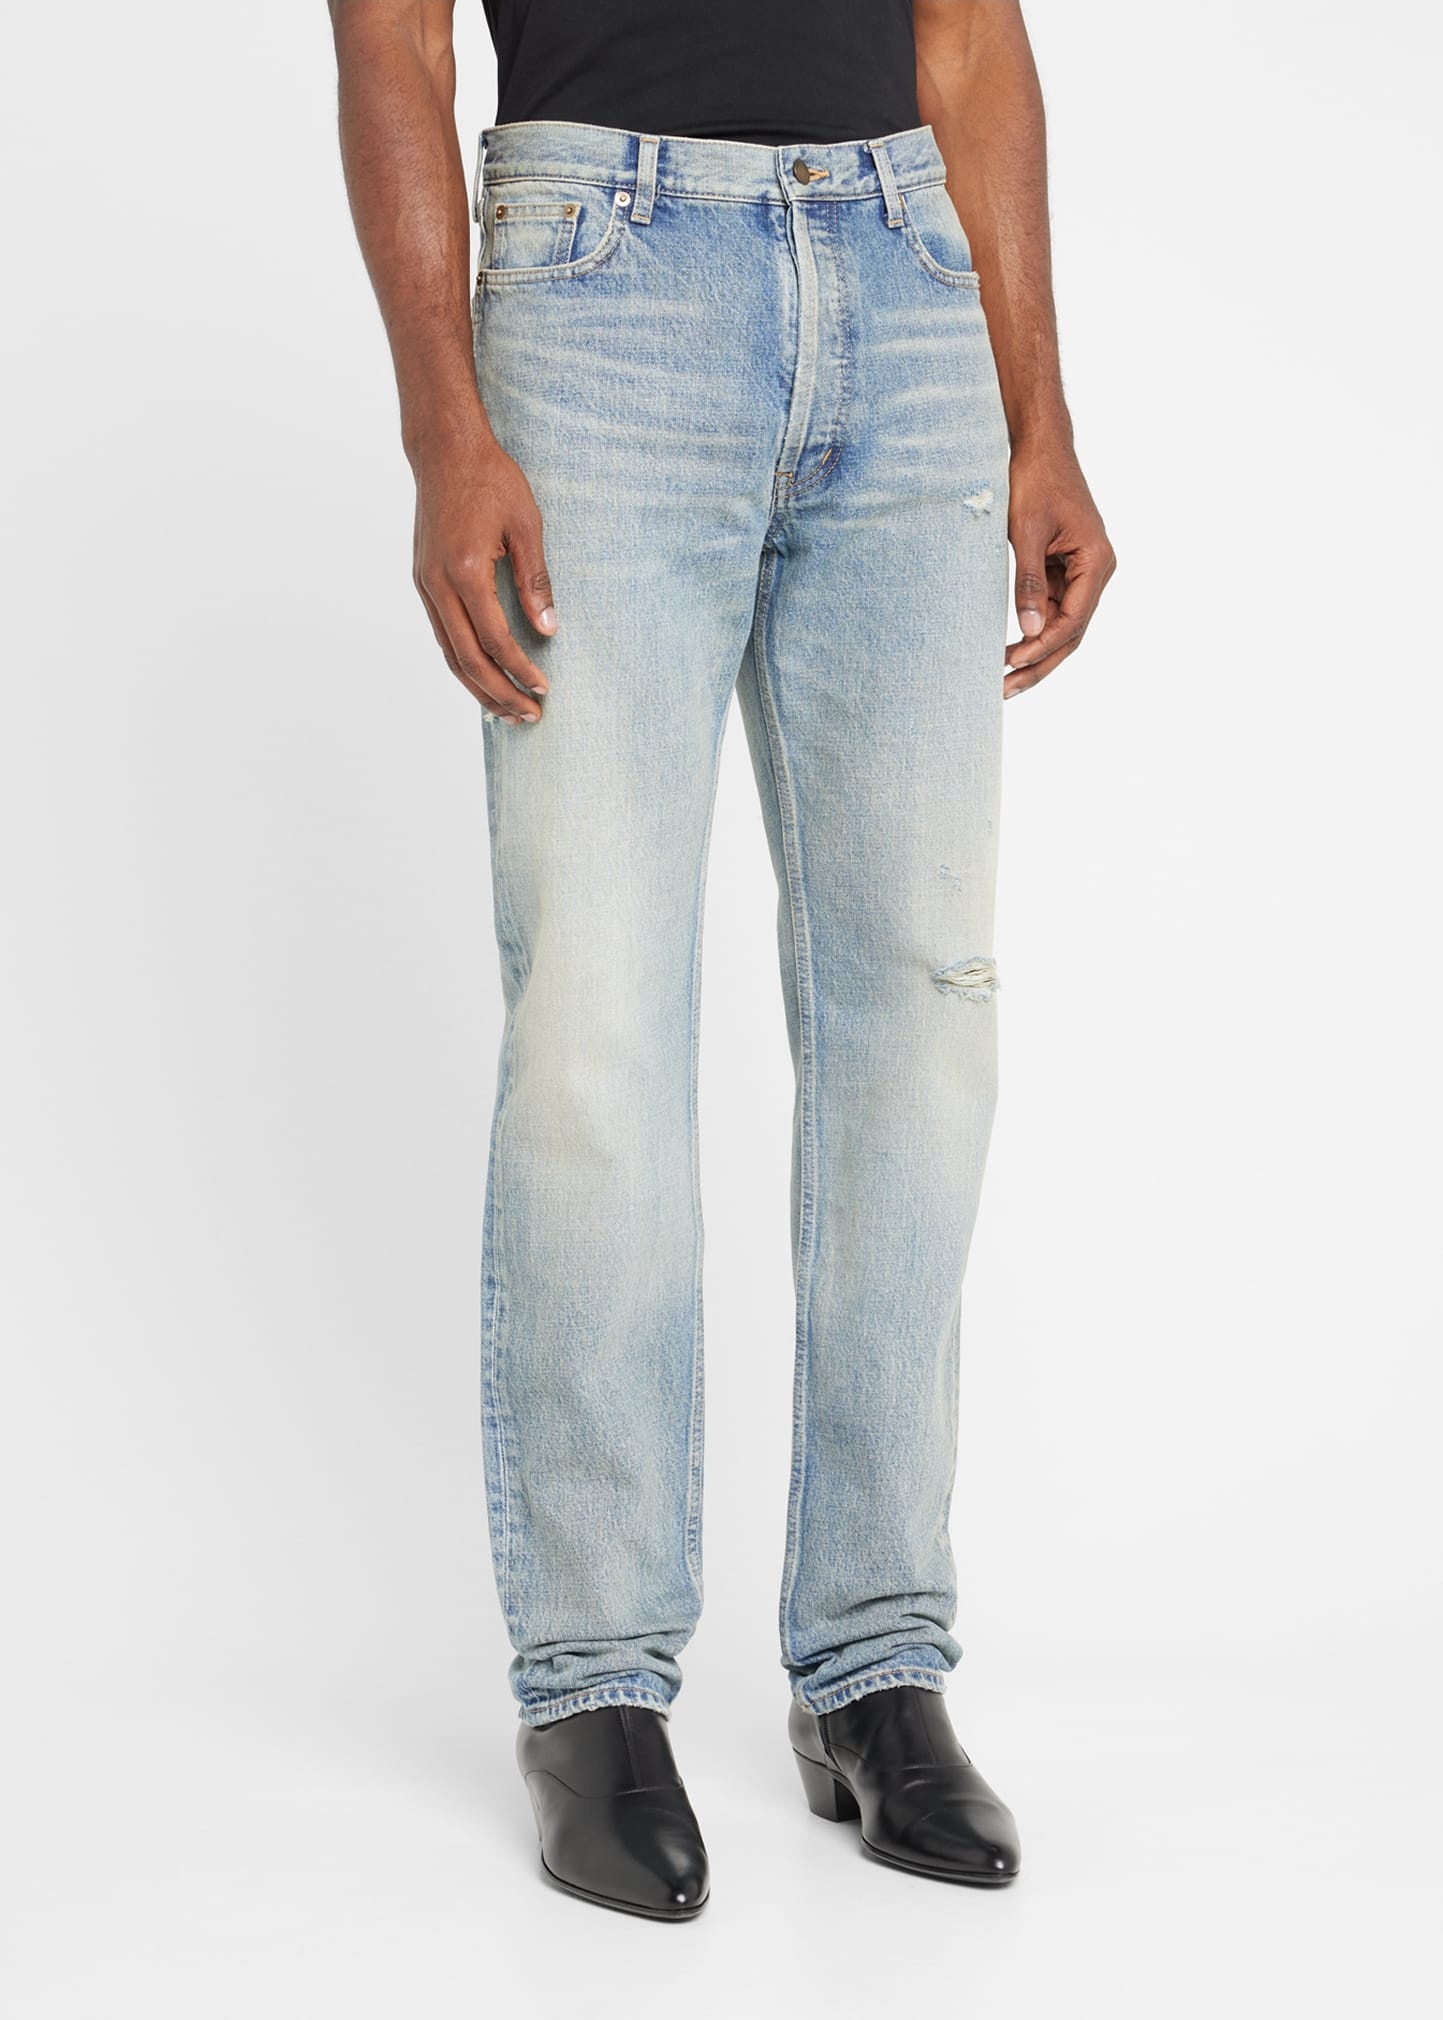 Men's Distressed Relaxed-Fit Jeans - 4